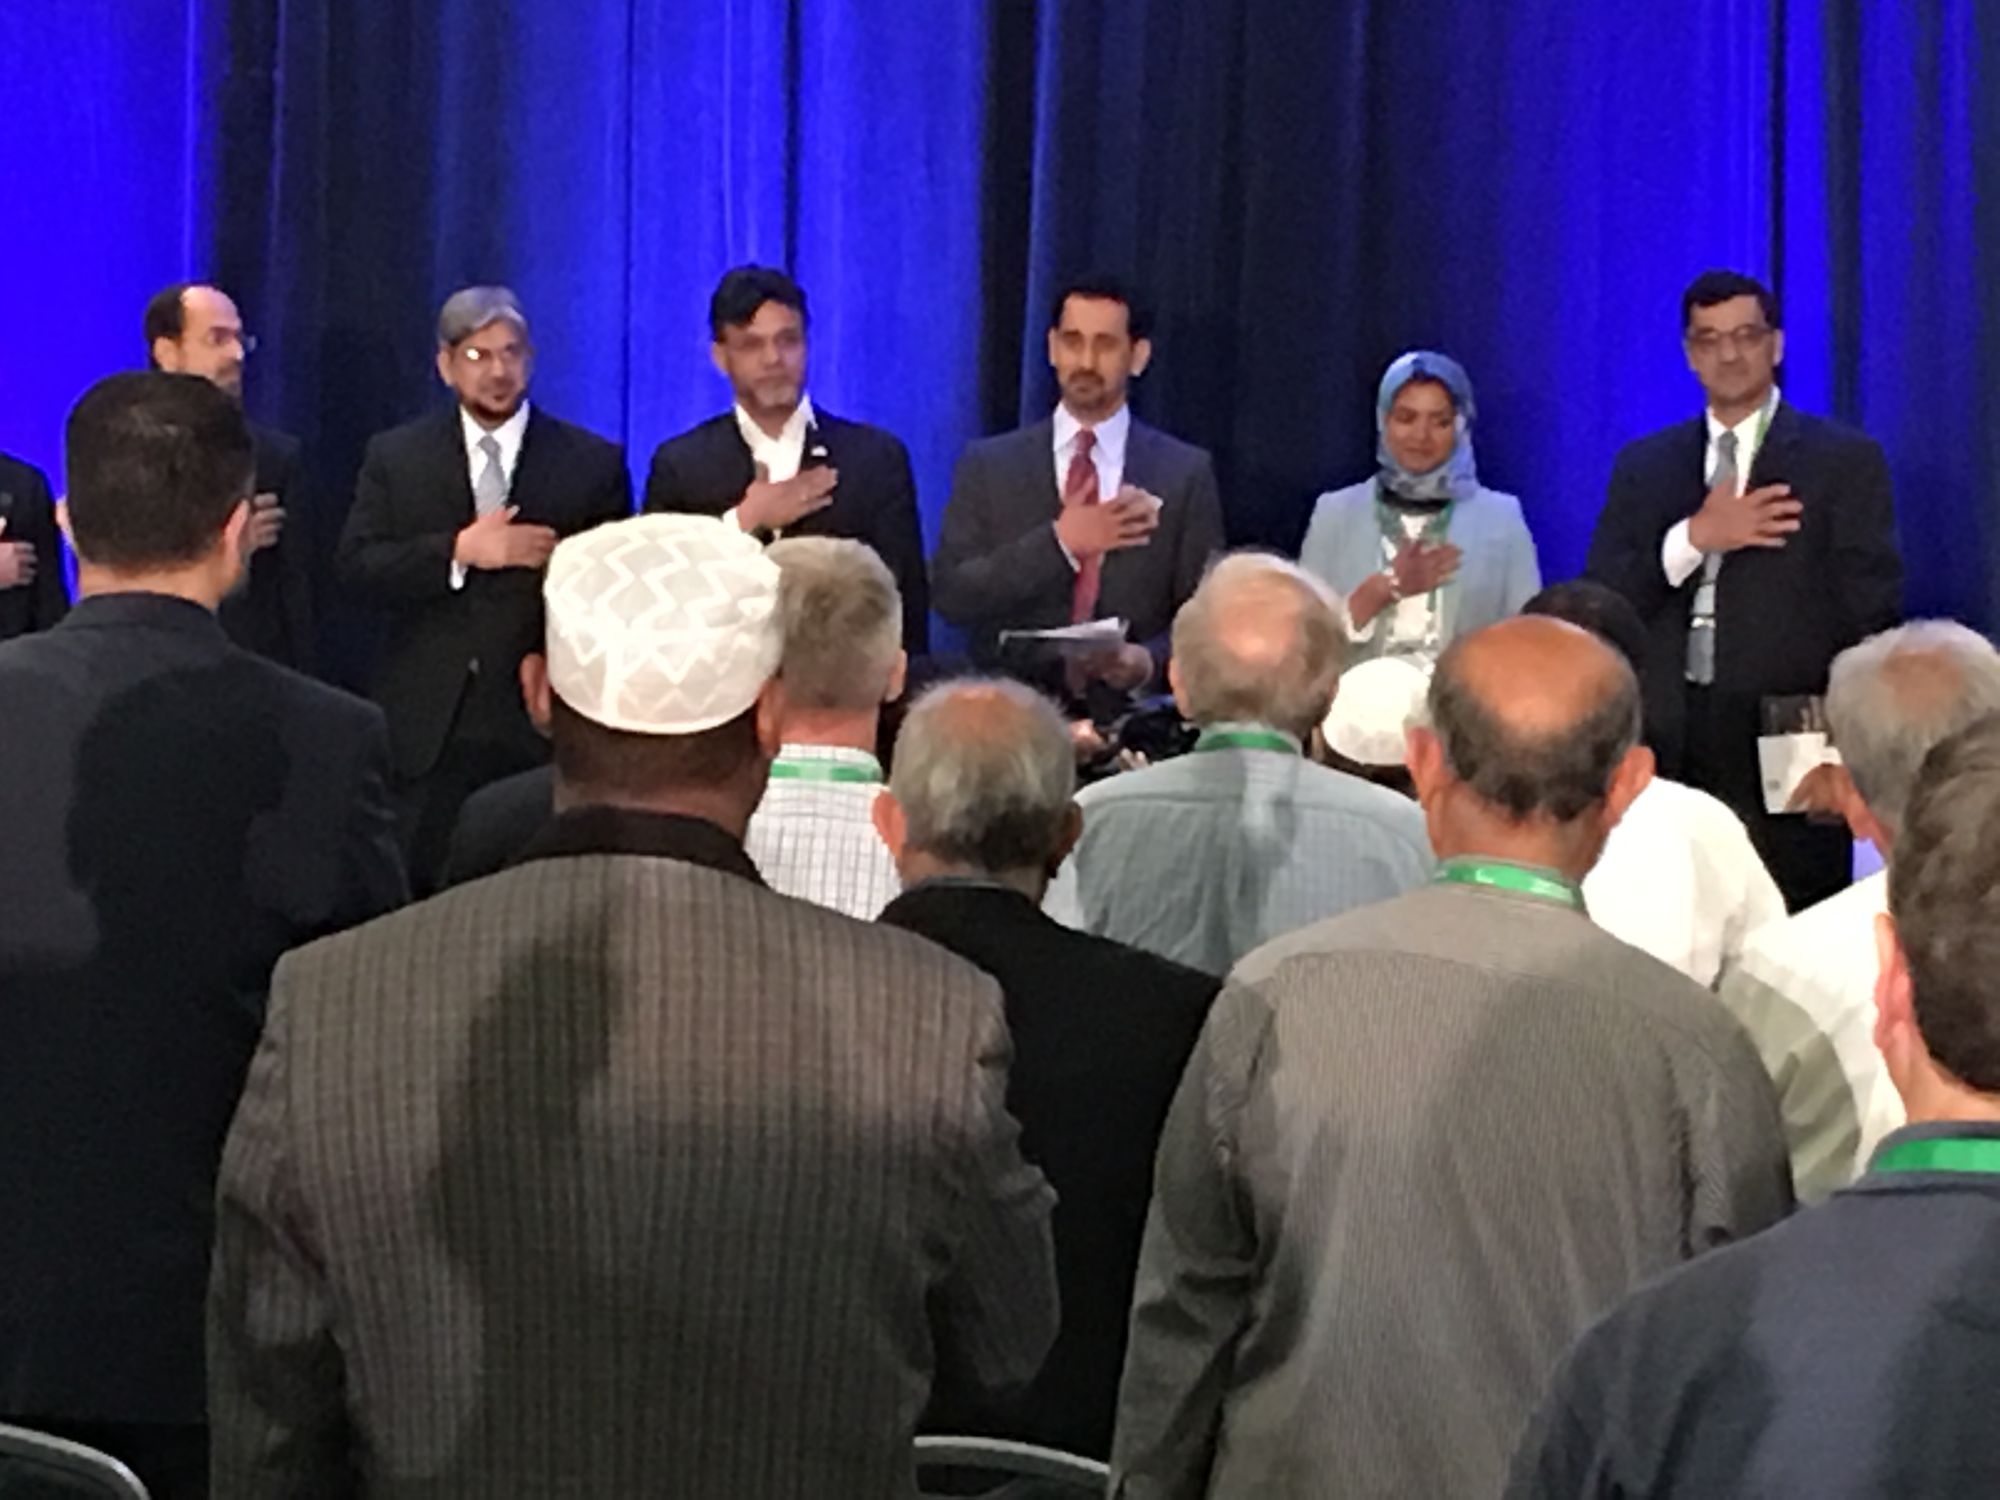 American Muslims meet in Chicago for ISNA Convention